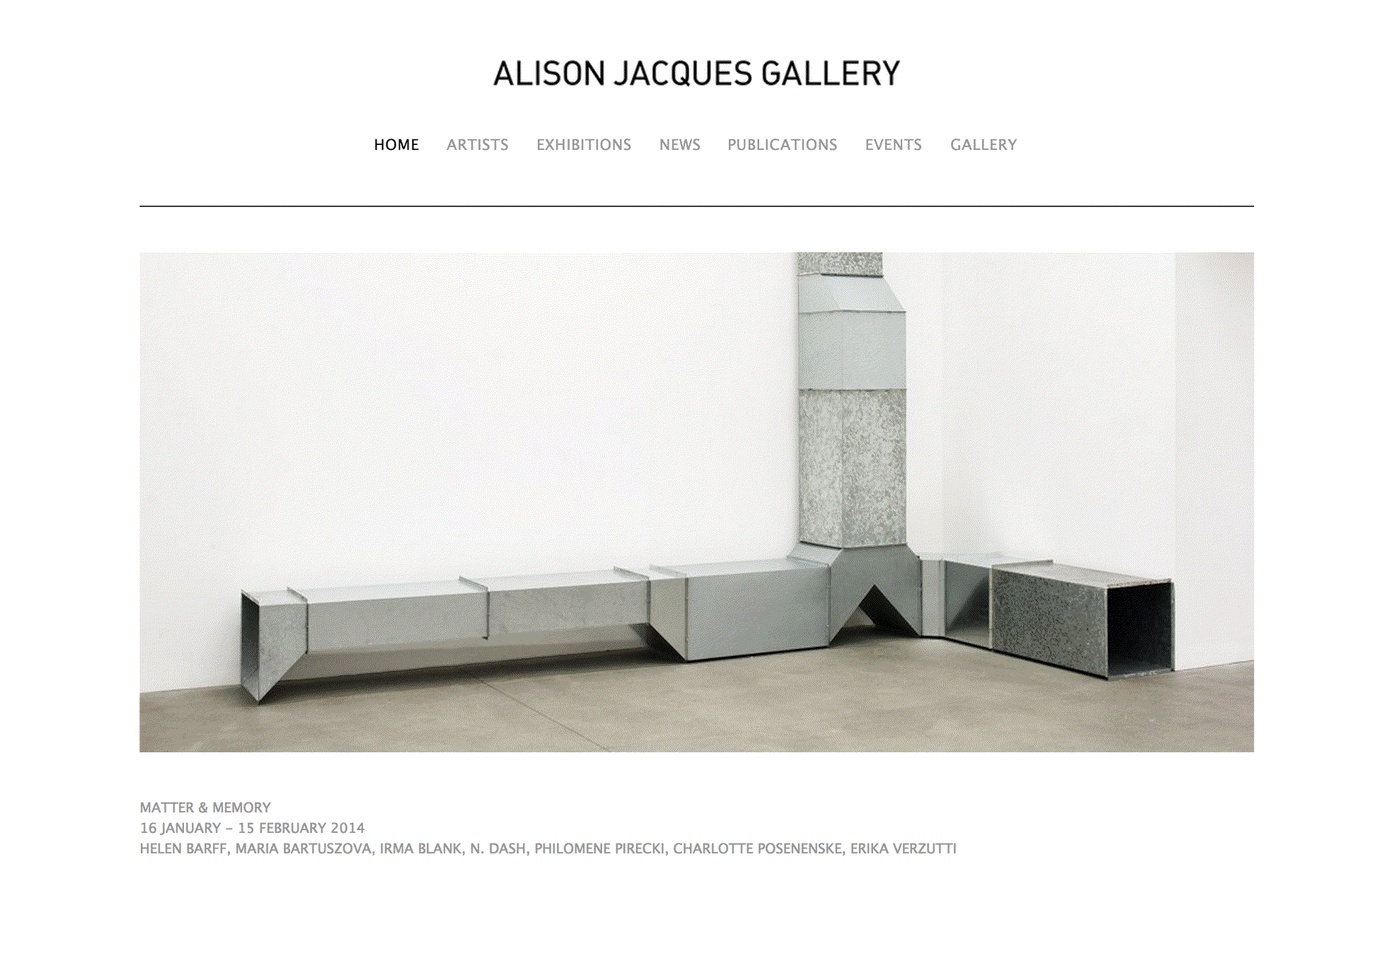 Alison Jacques Gallery